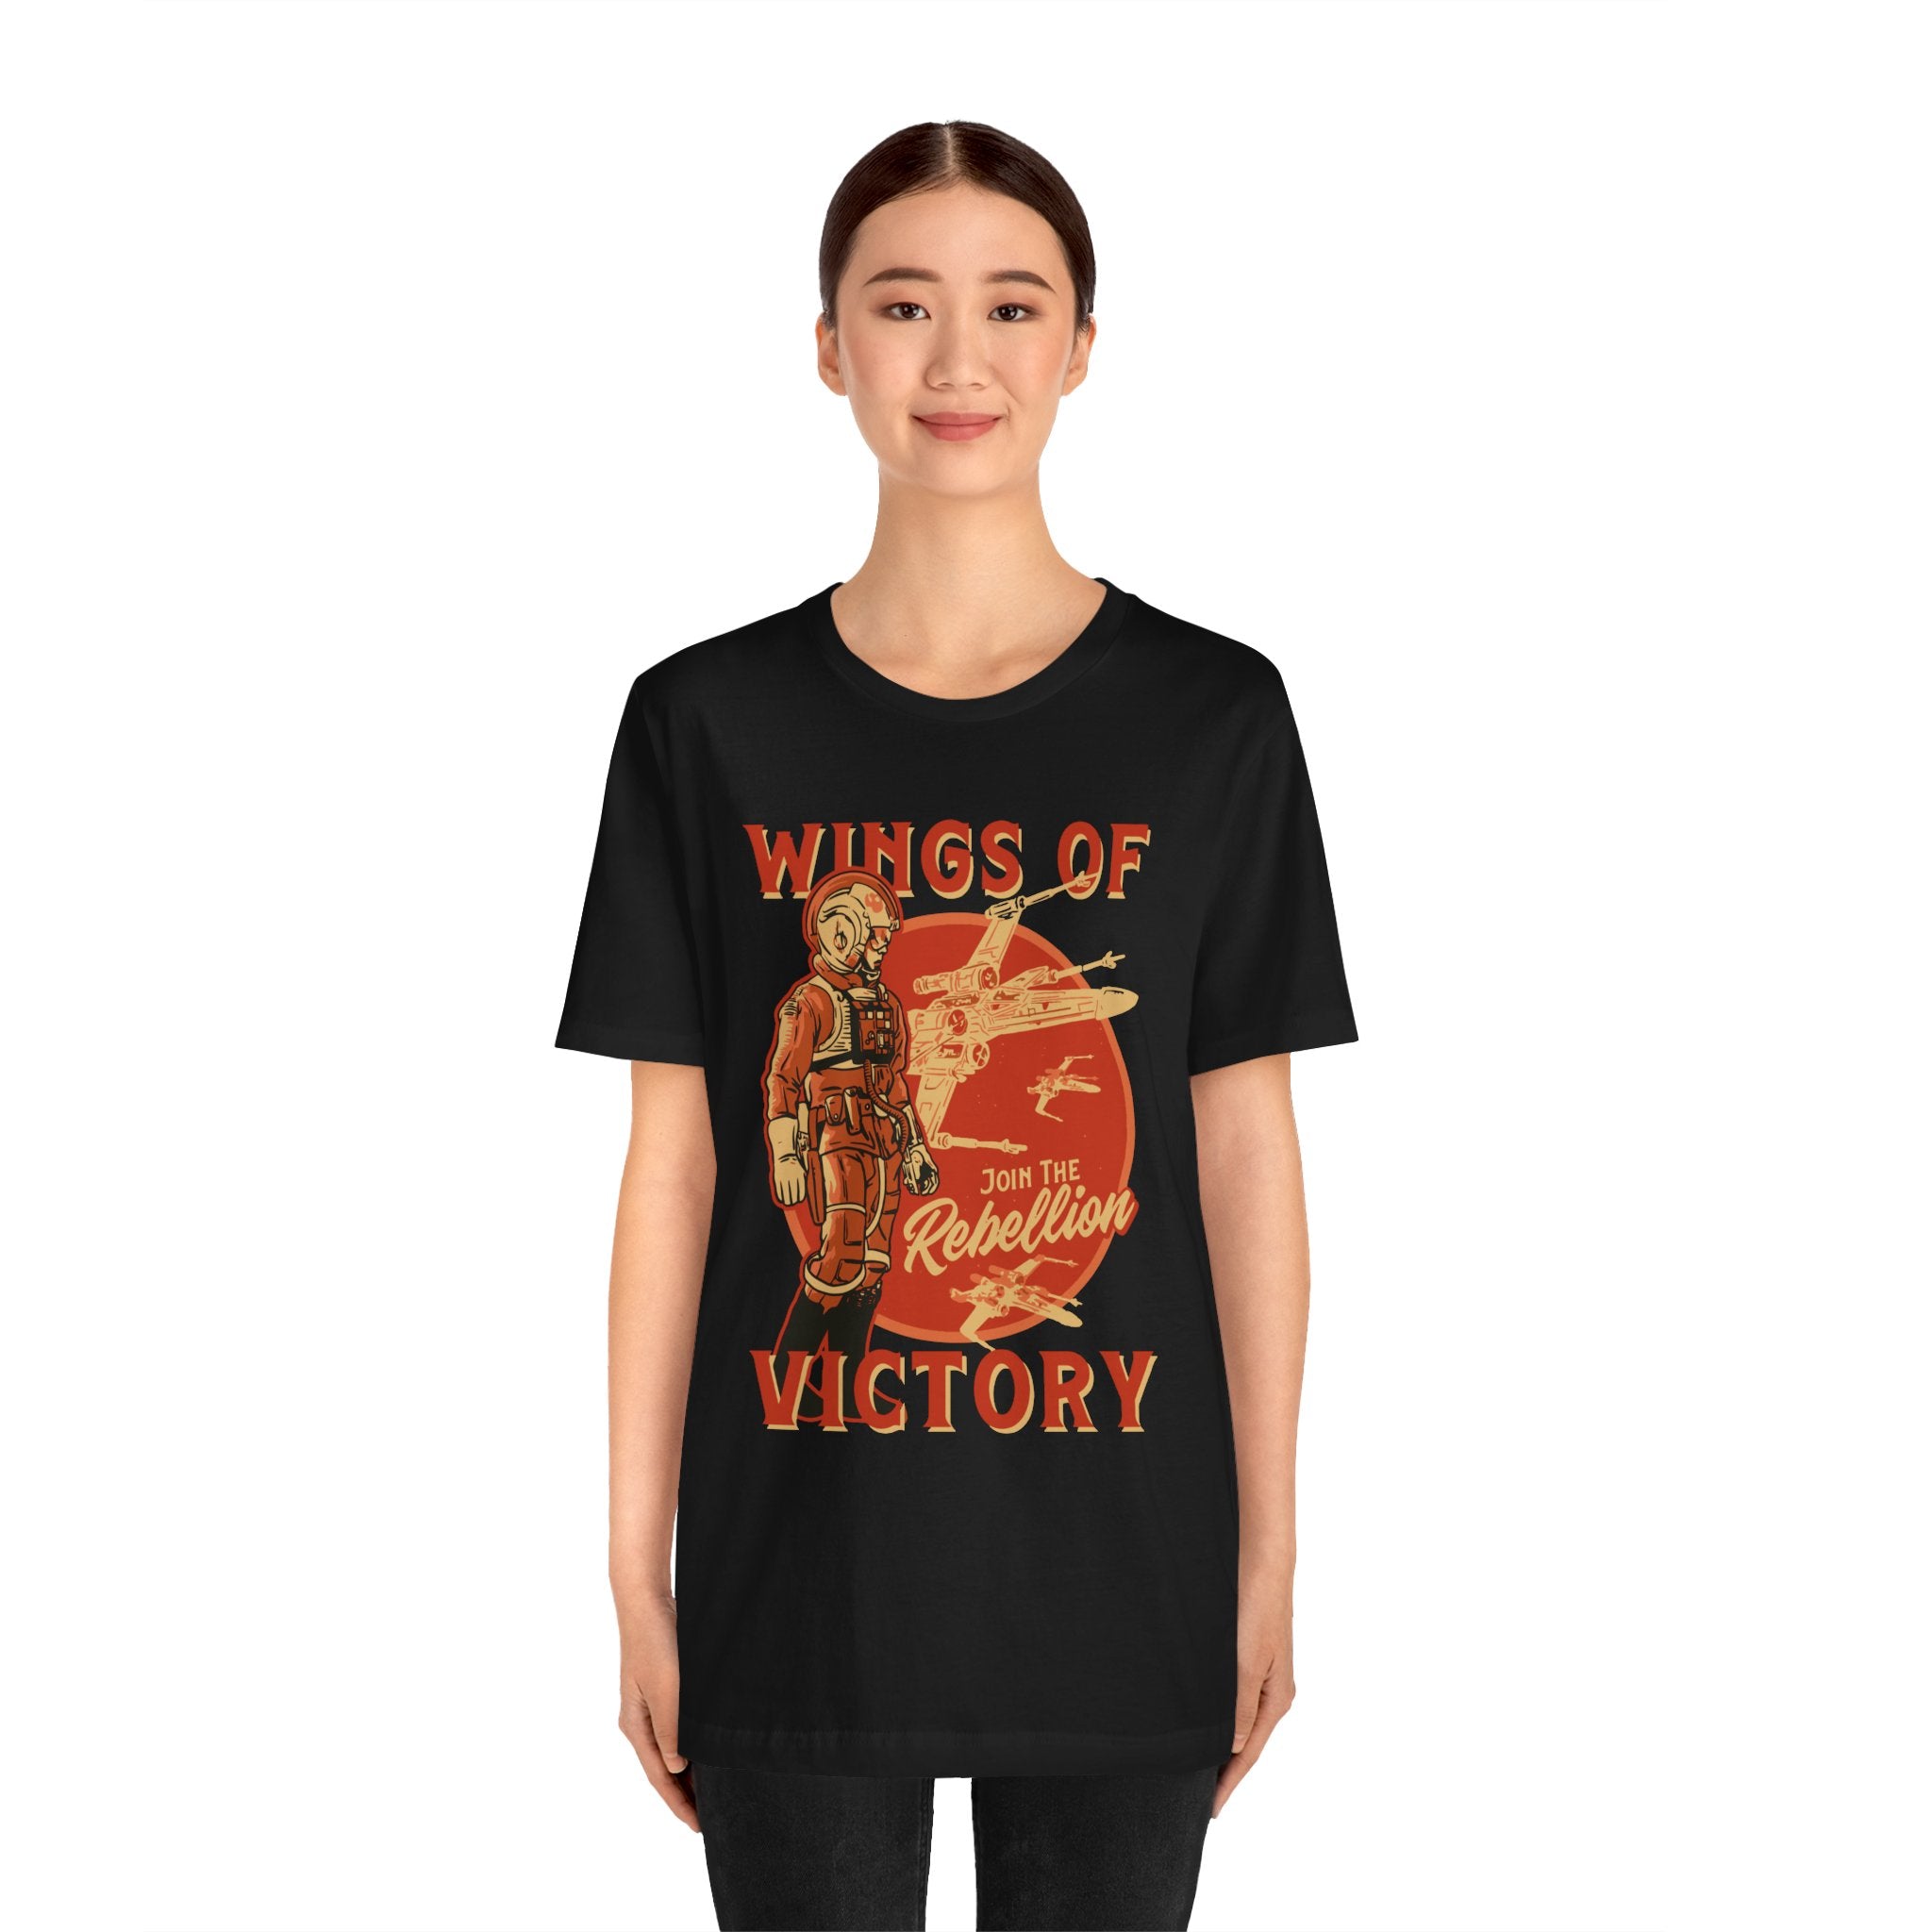 A young woman wearing a black unisex Wings of Victory T-shirt with a vintage orange and yellow graphic that reads "wings of rebellion victory.